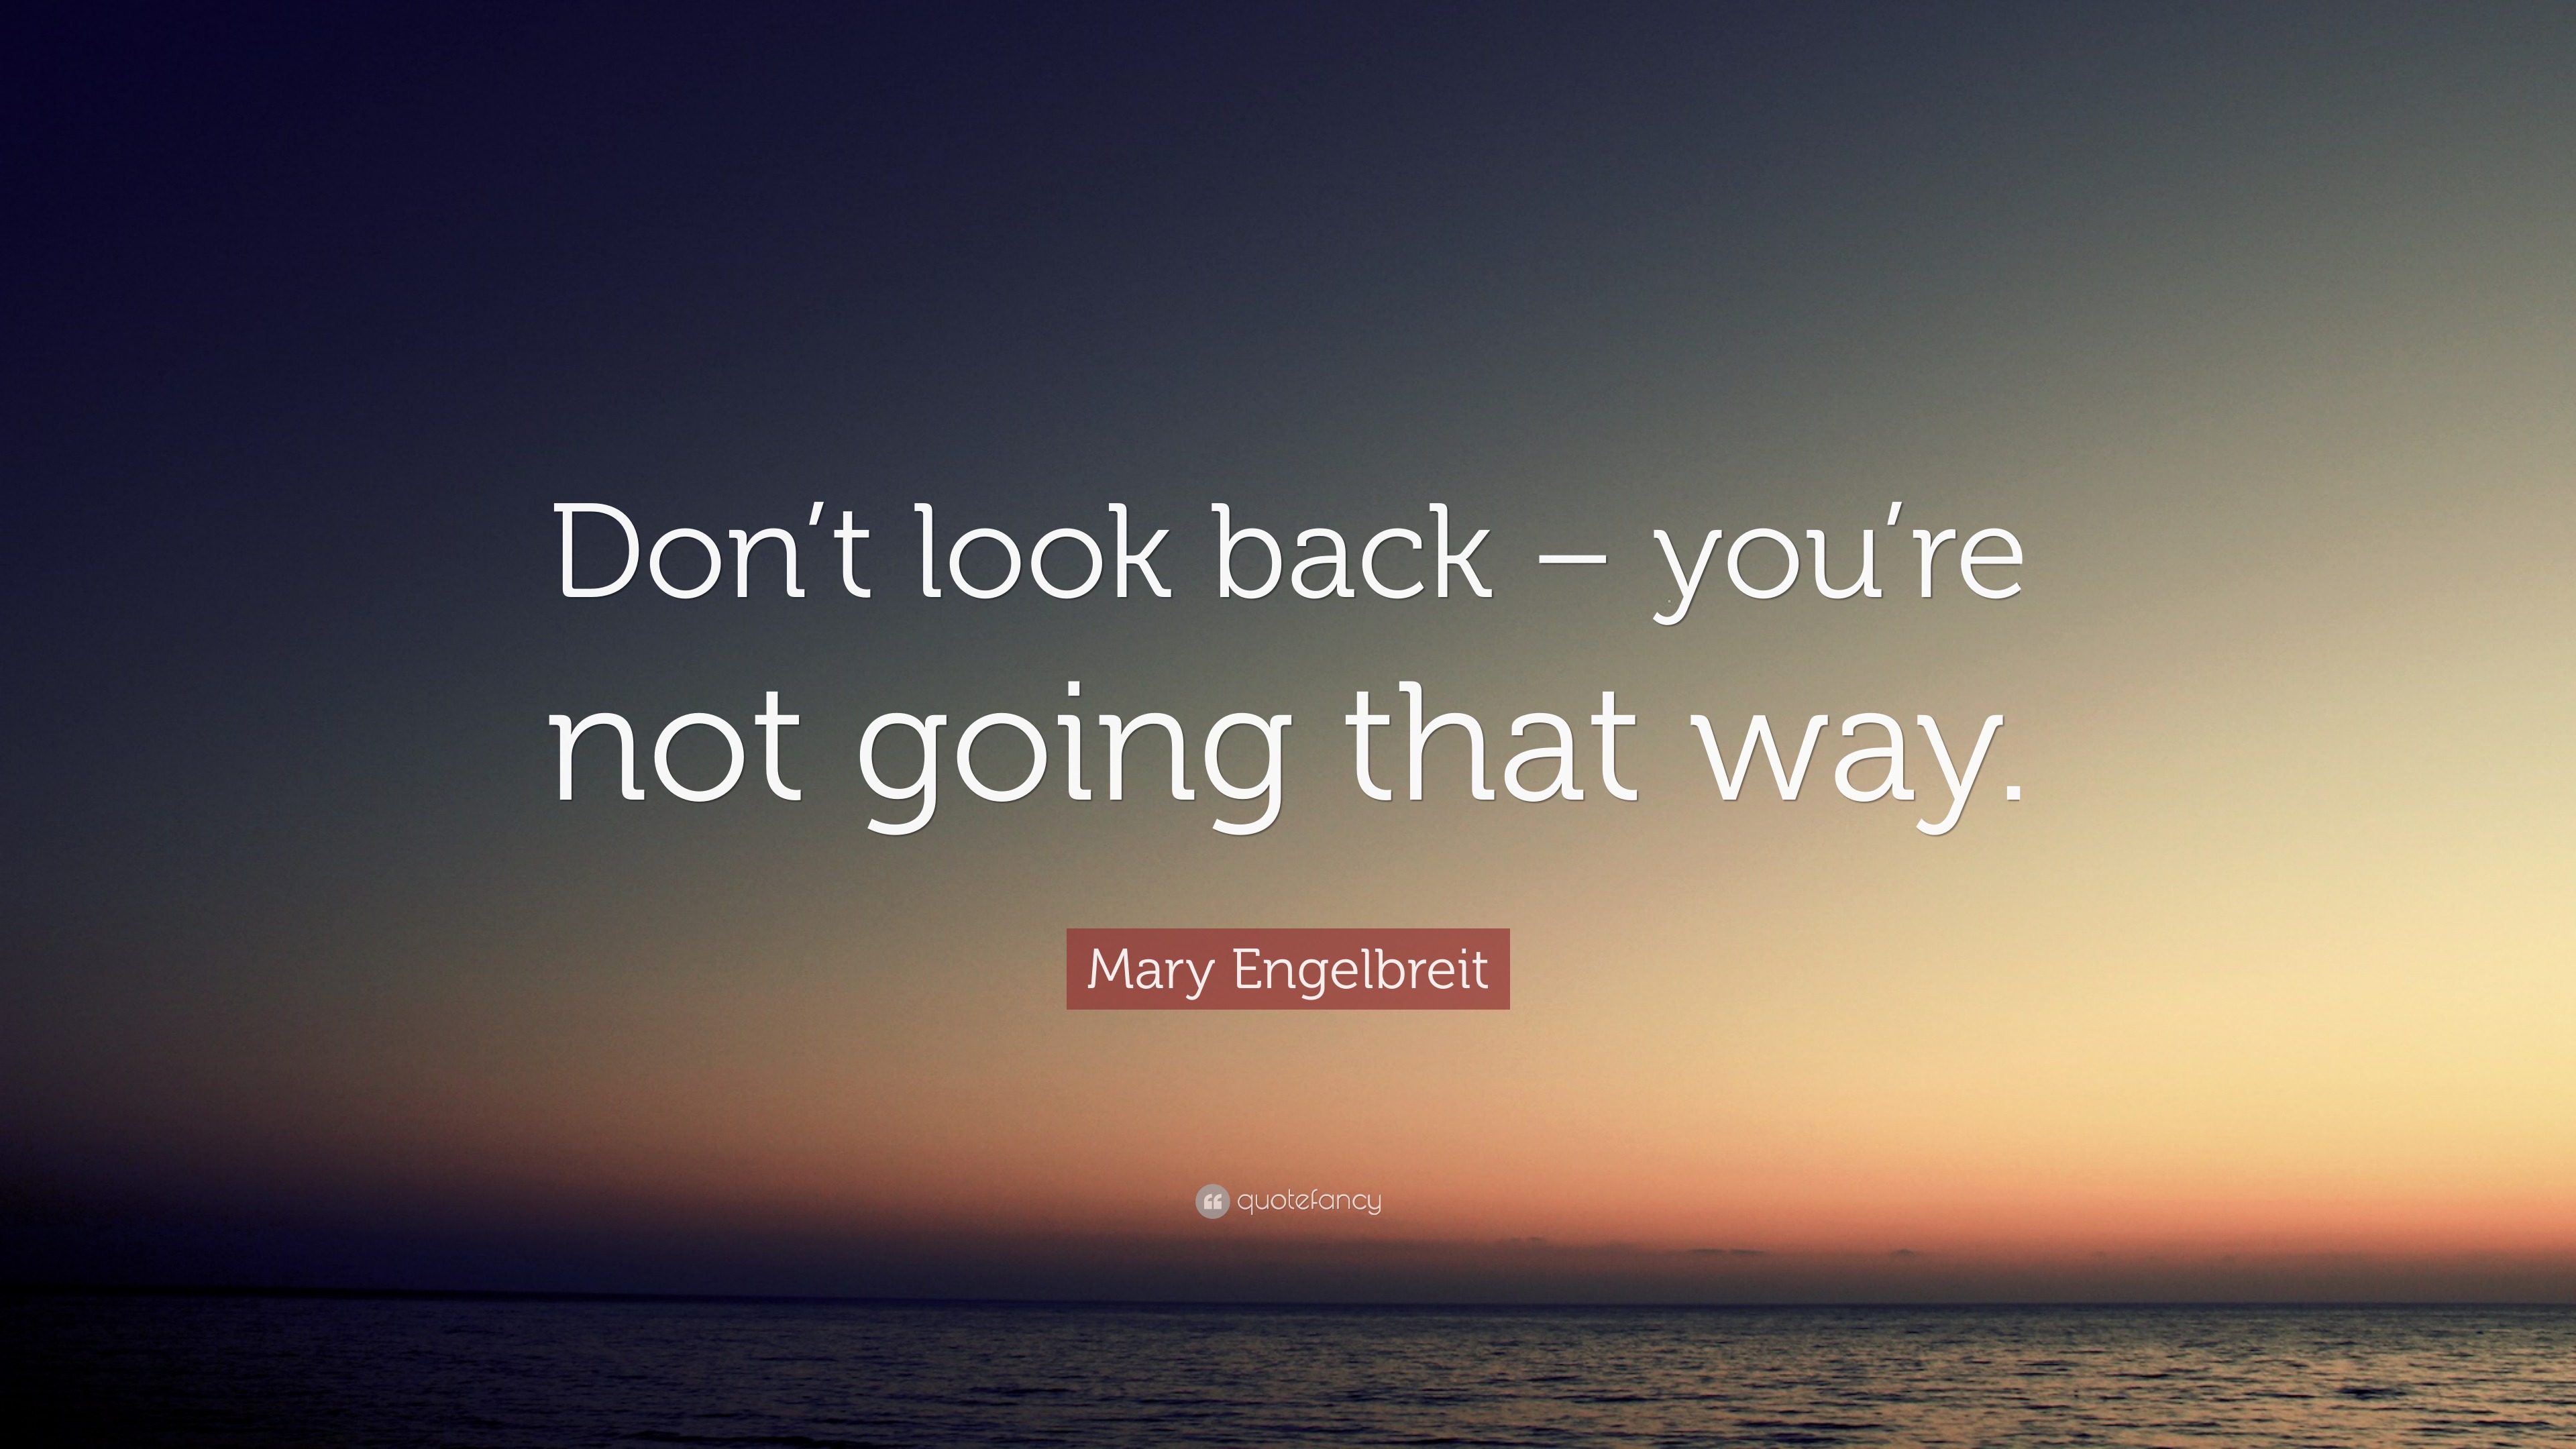 Mary Engelbreit Quote: “Don’t look back – you’re not going that way